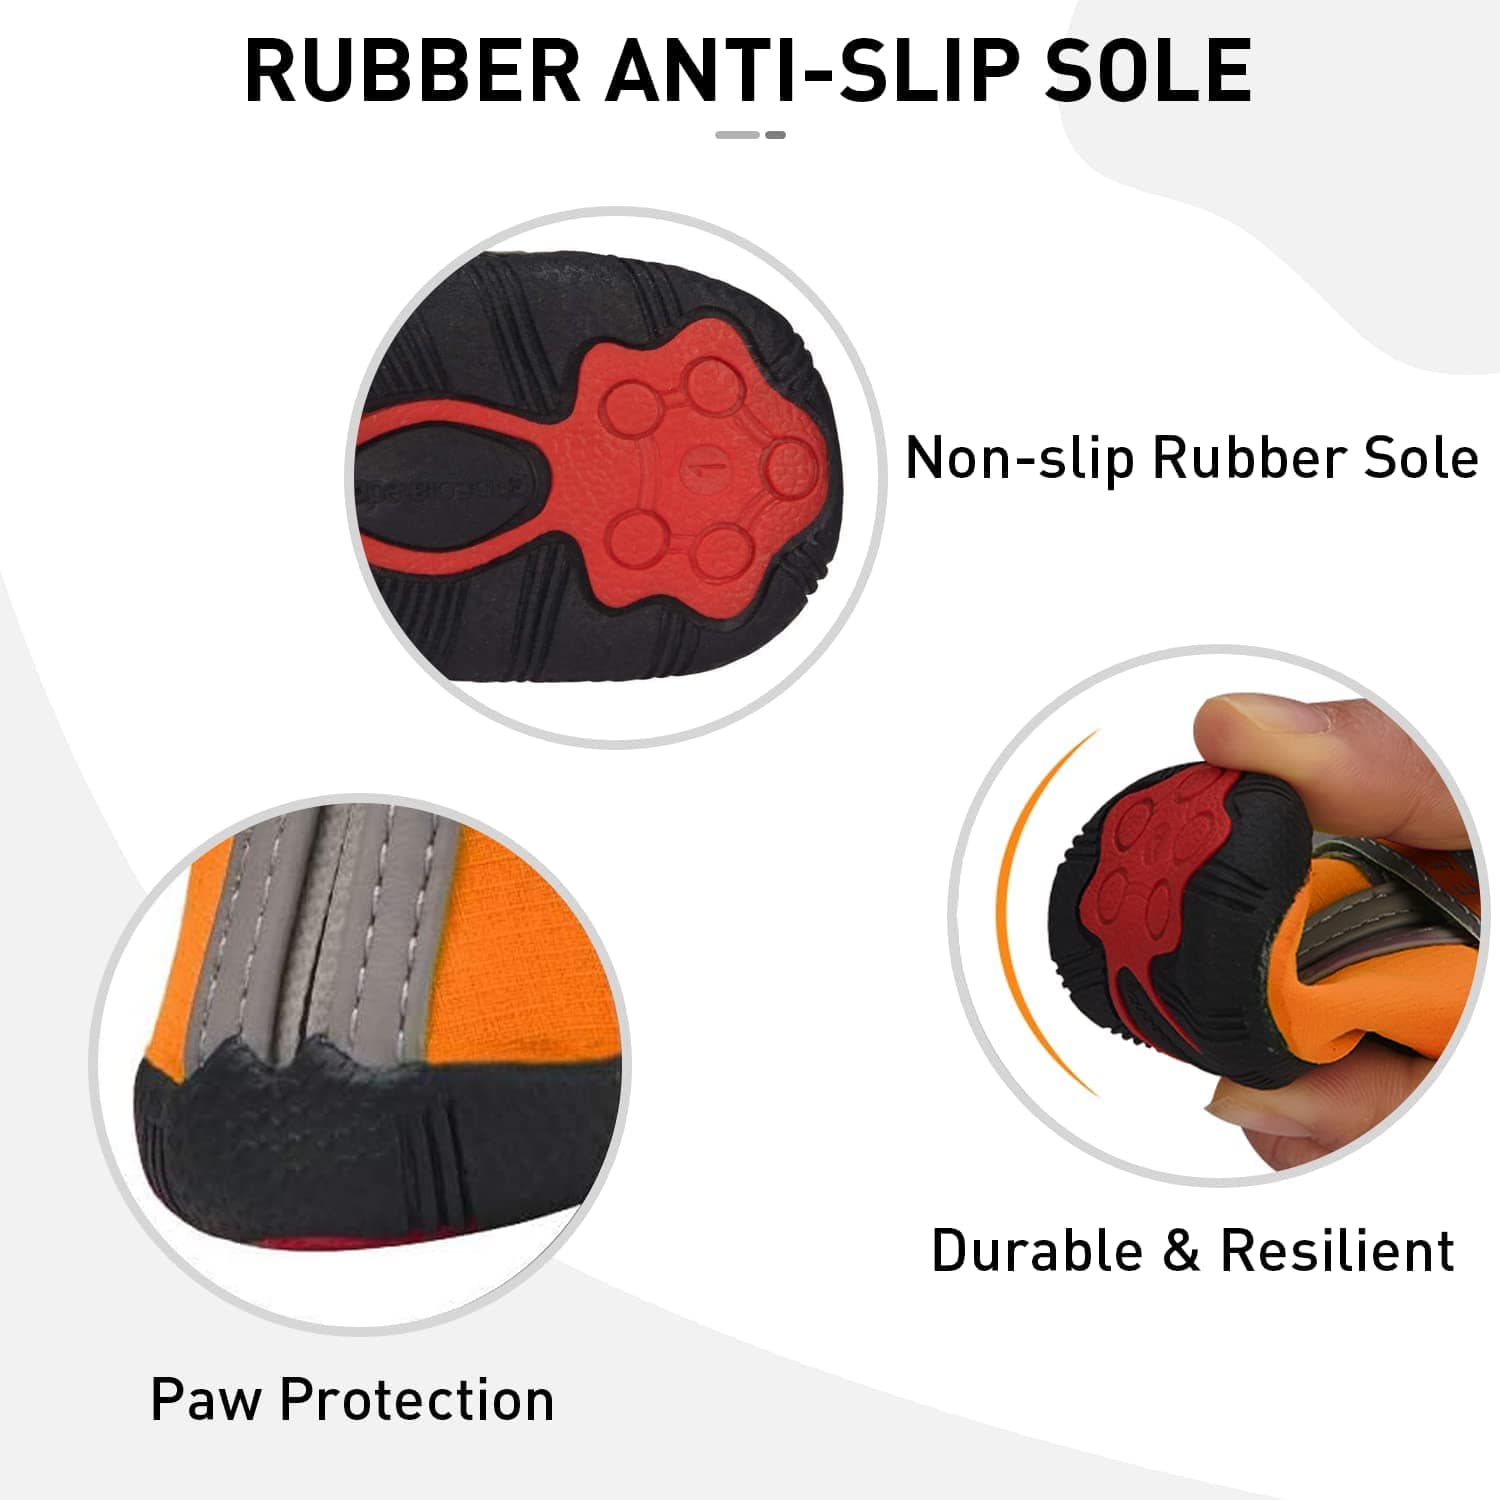 KUTKUT Waterproof Dog Booties Paw Protector, Anti-Slip Breathable Winter Snow with Reflective Strips Soft Comfortable Anti-Slip Rubber Sole Dog Shoes for Small Medium Dogs  Orange - kutkutsty